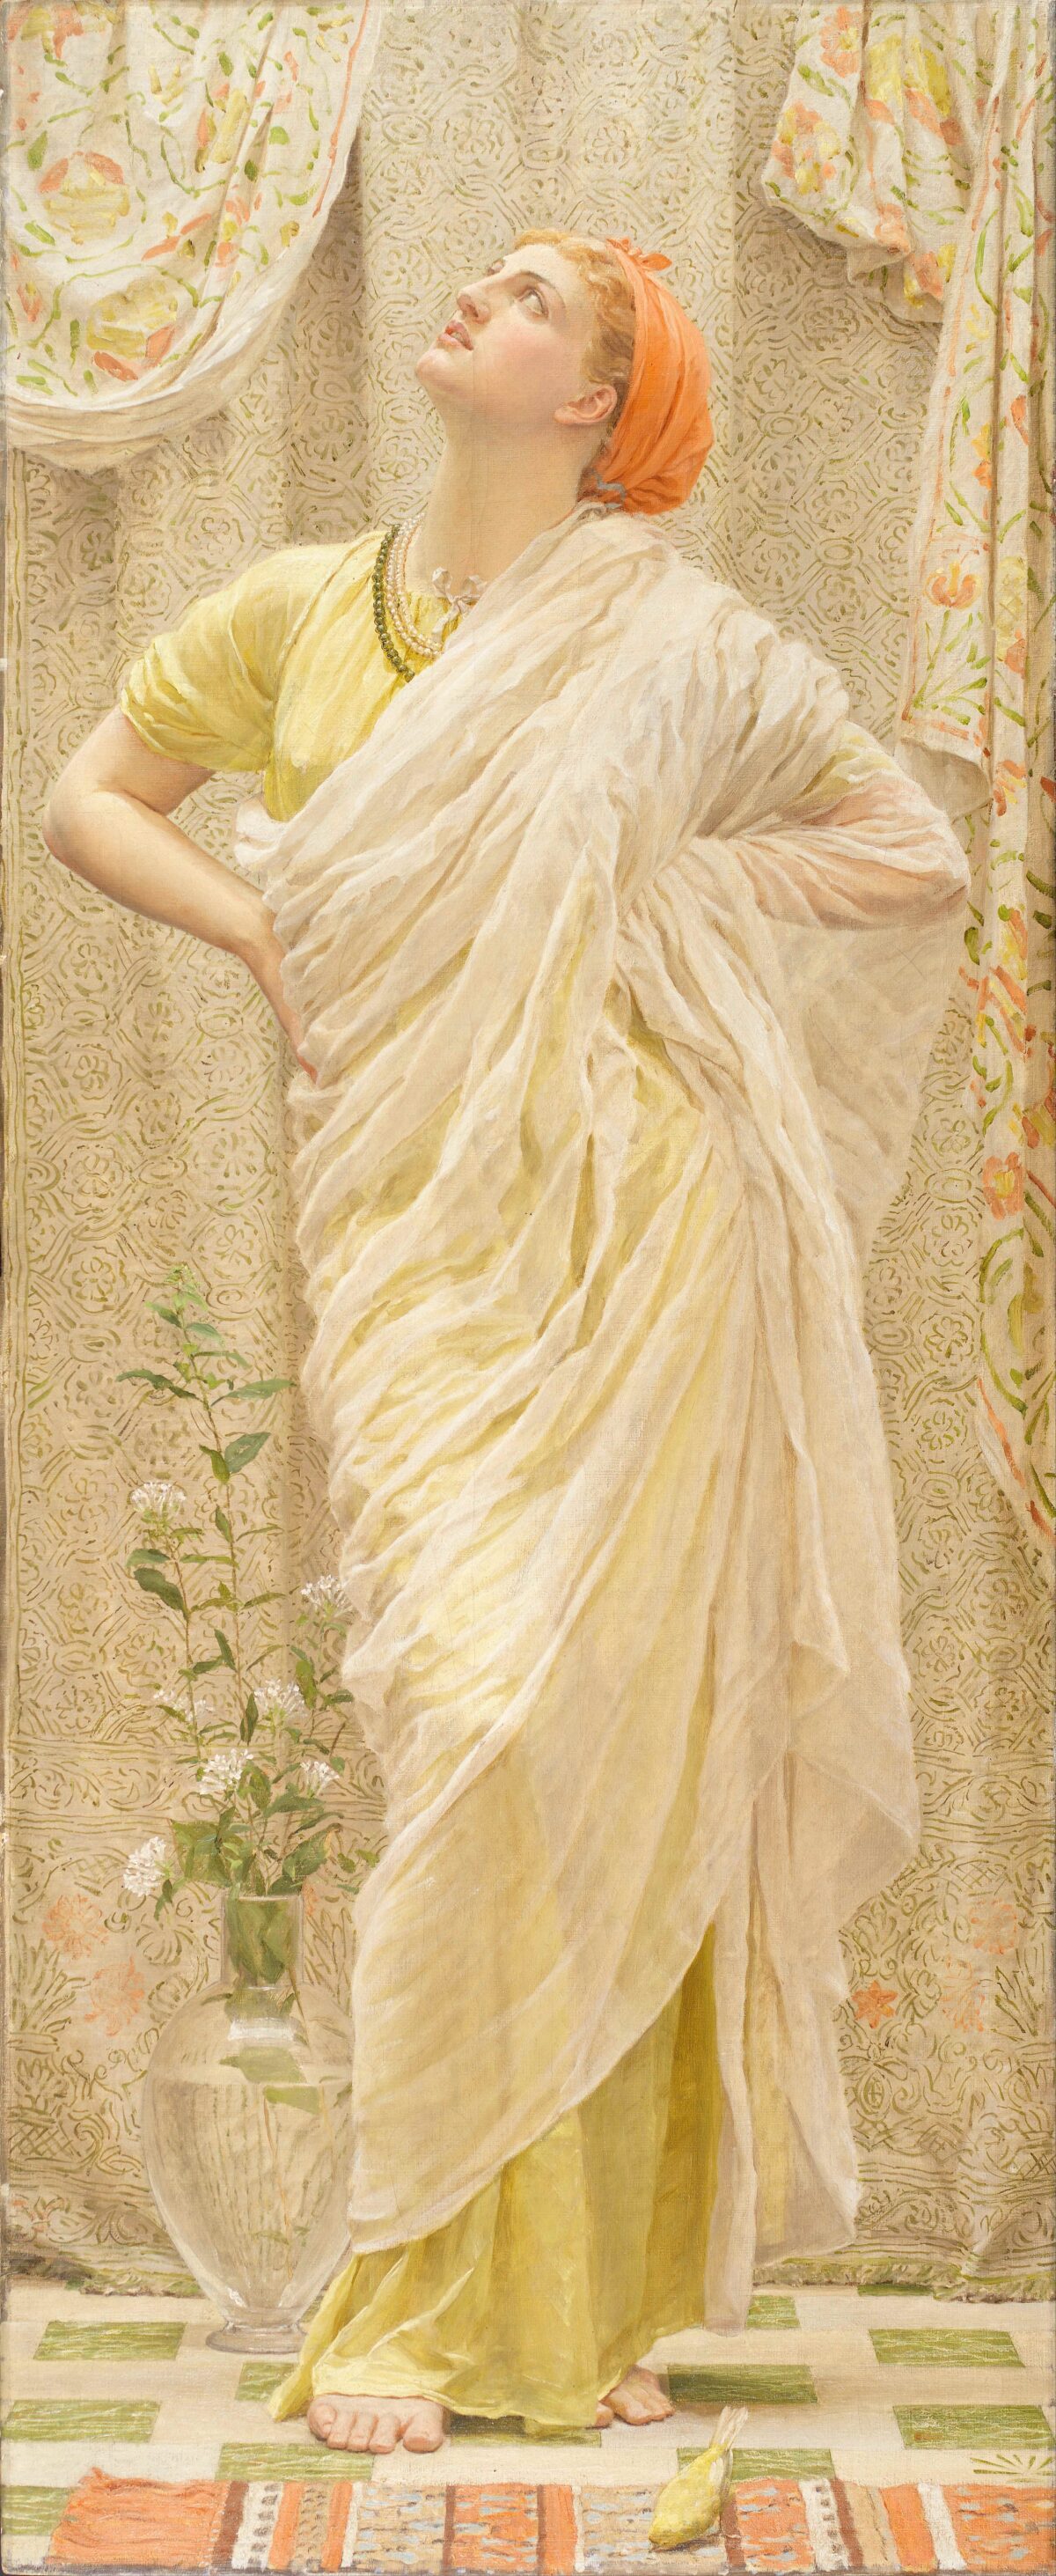 "Canaries," circa 1875-1880, by Albert Joseph Moore. Oil on canvas; 61.8 inches by 25.4 inches. Birmingham Museum and Art Gallery, Birmingham. (Public Domain)